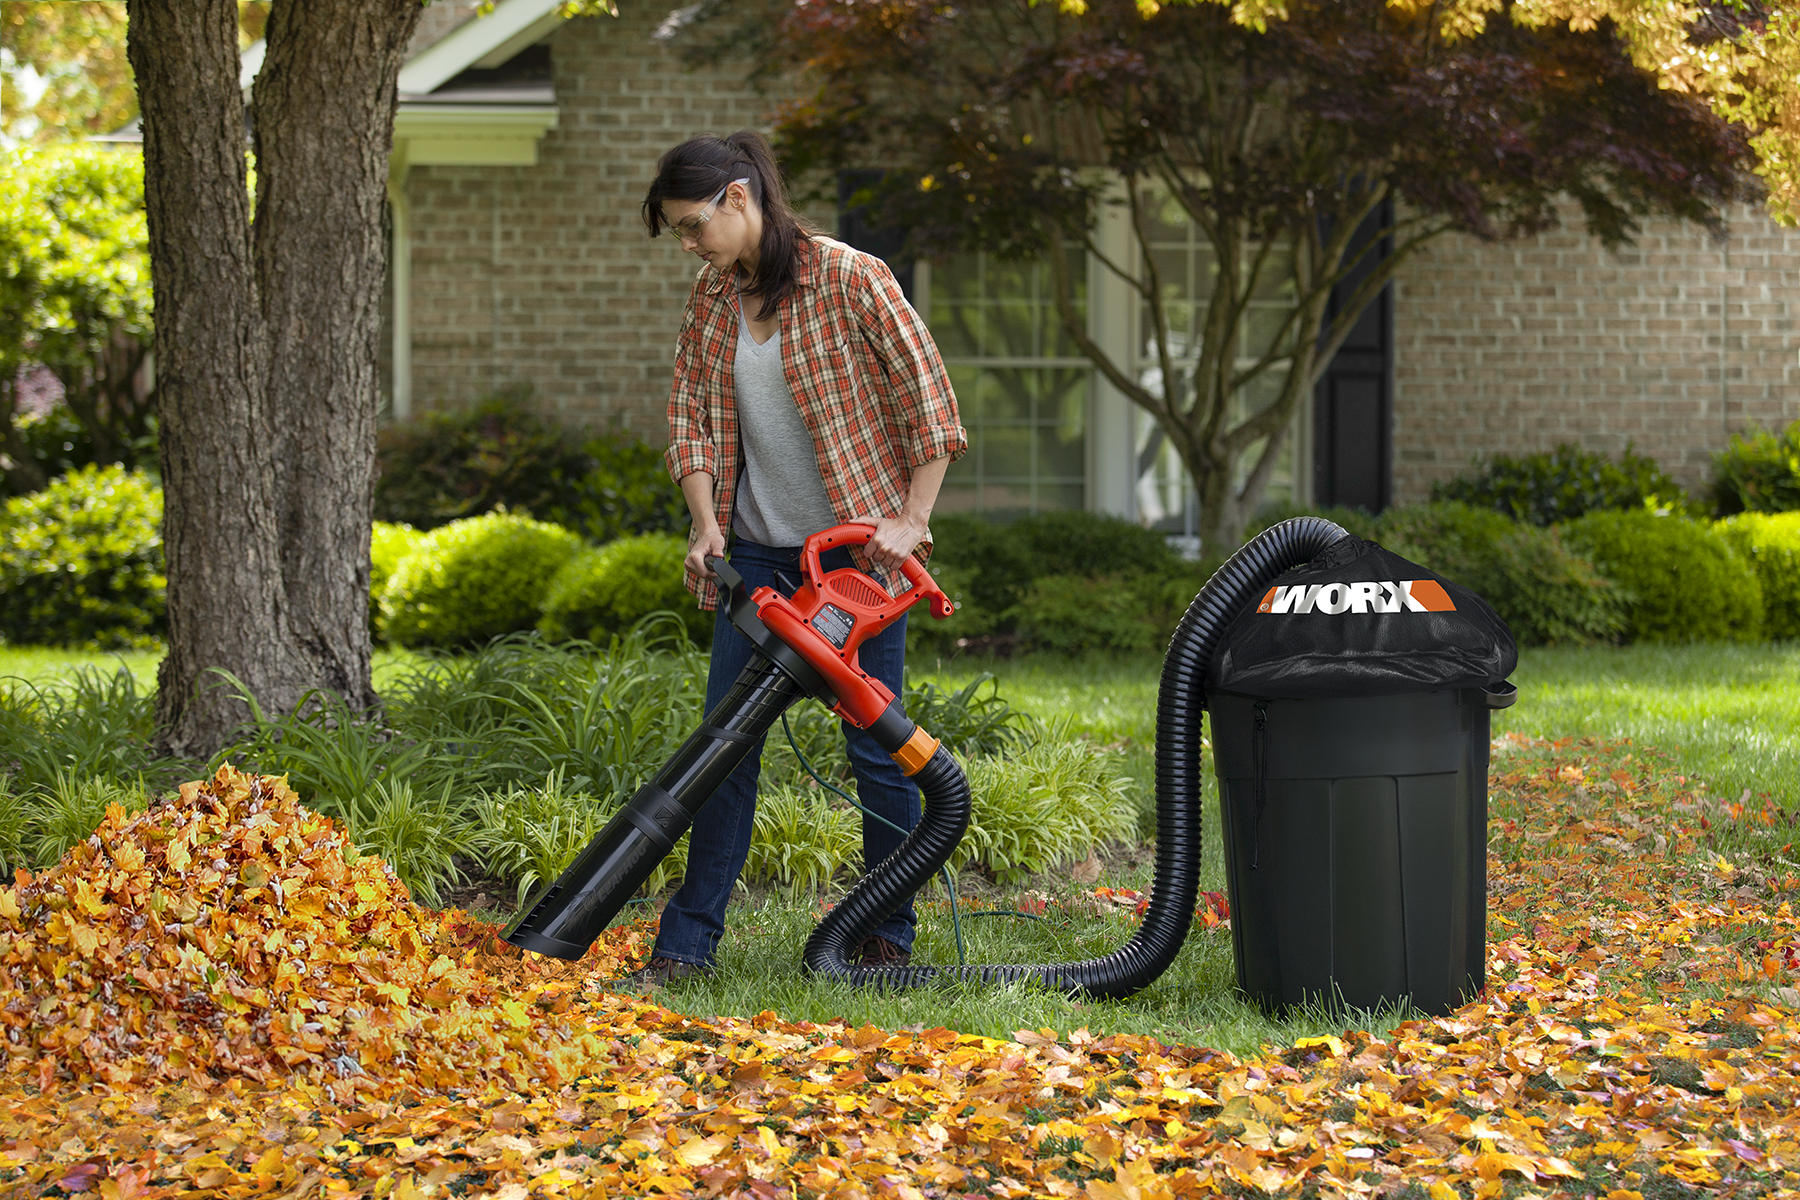 New WORX LeafPro System Makes Quick Work Of Fall Leaf Cleanup